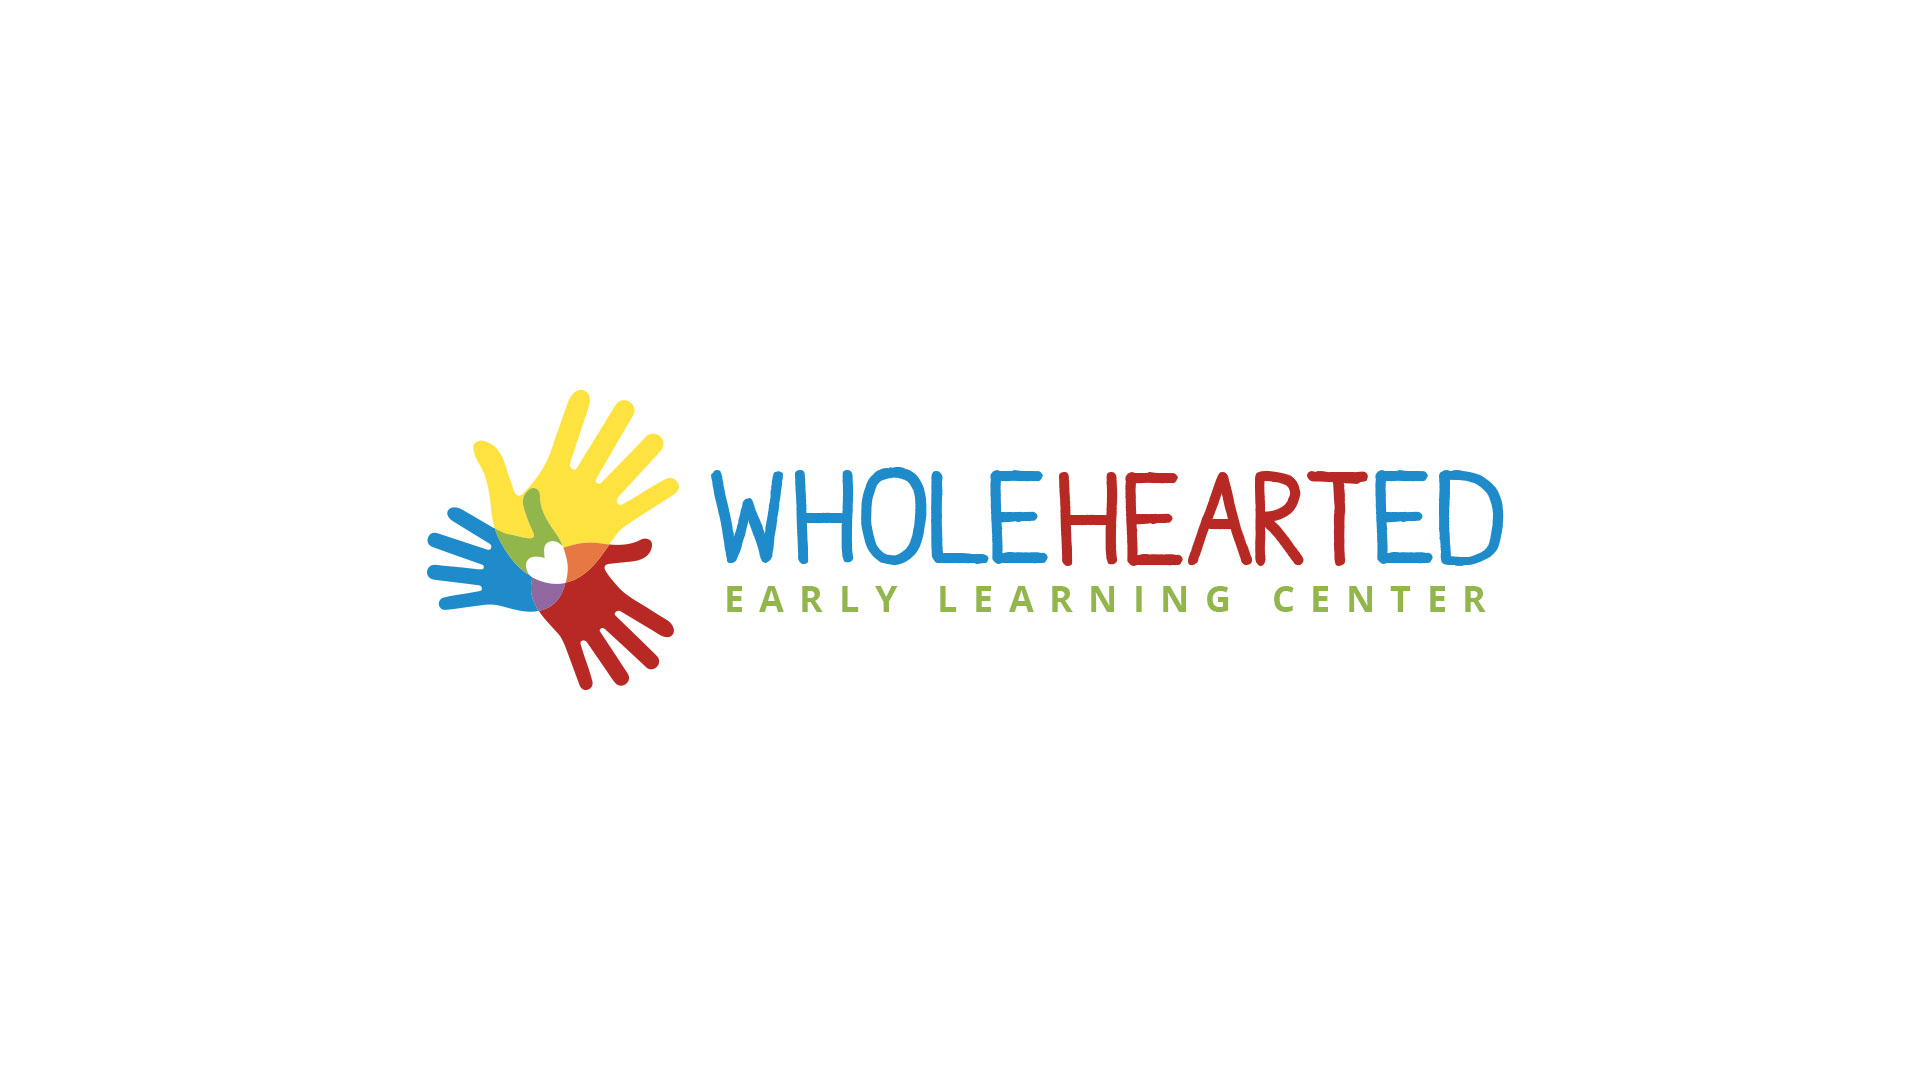 Wholehearted Early Learning Center Logo